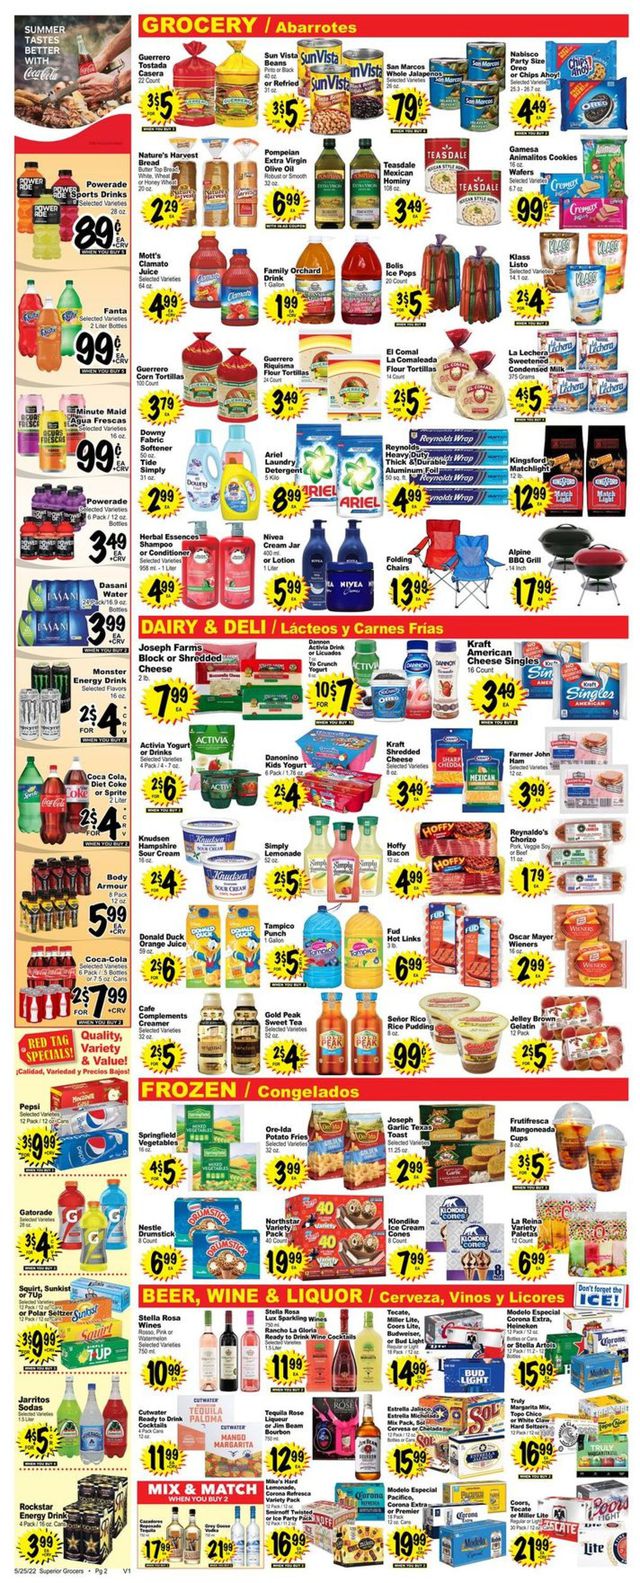 Superior Grocers Ad from 05/25/2022